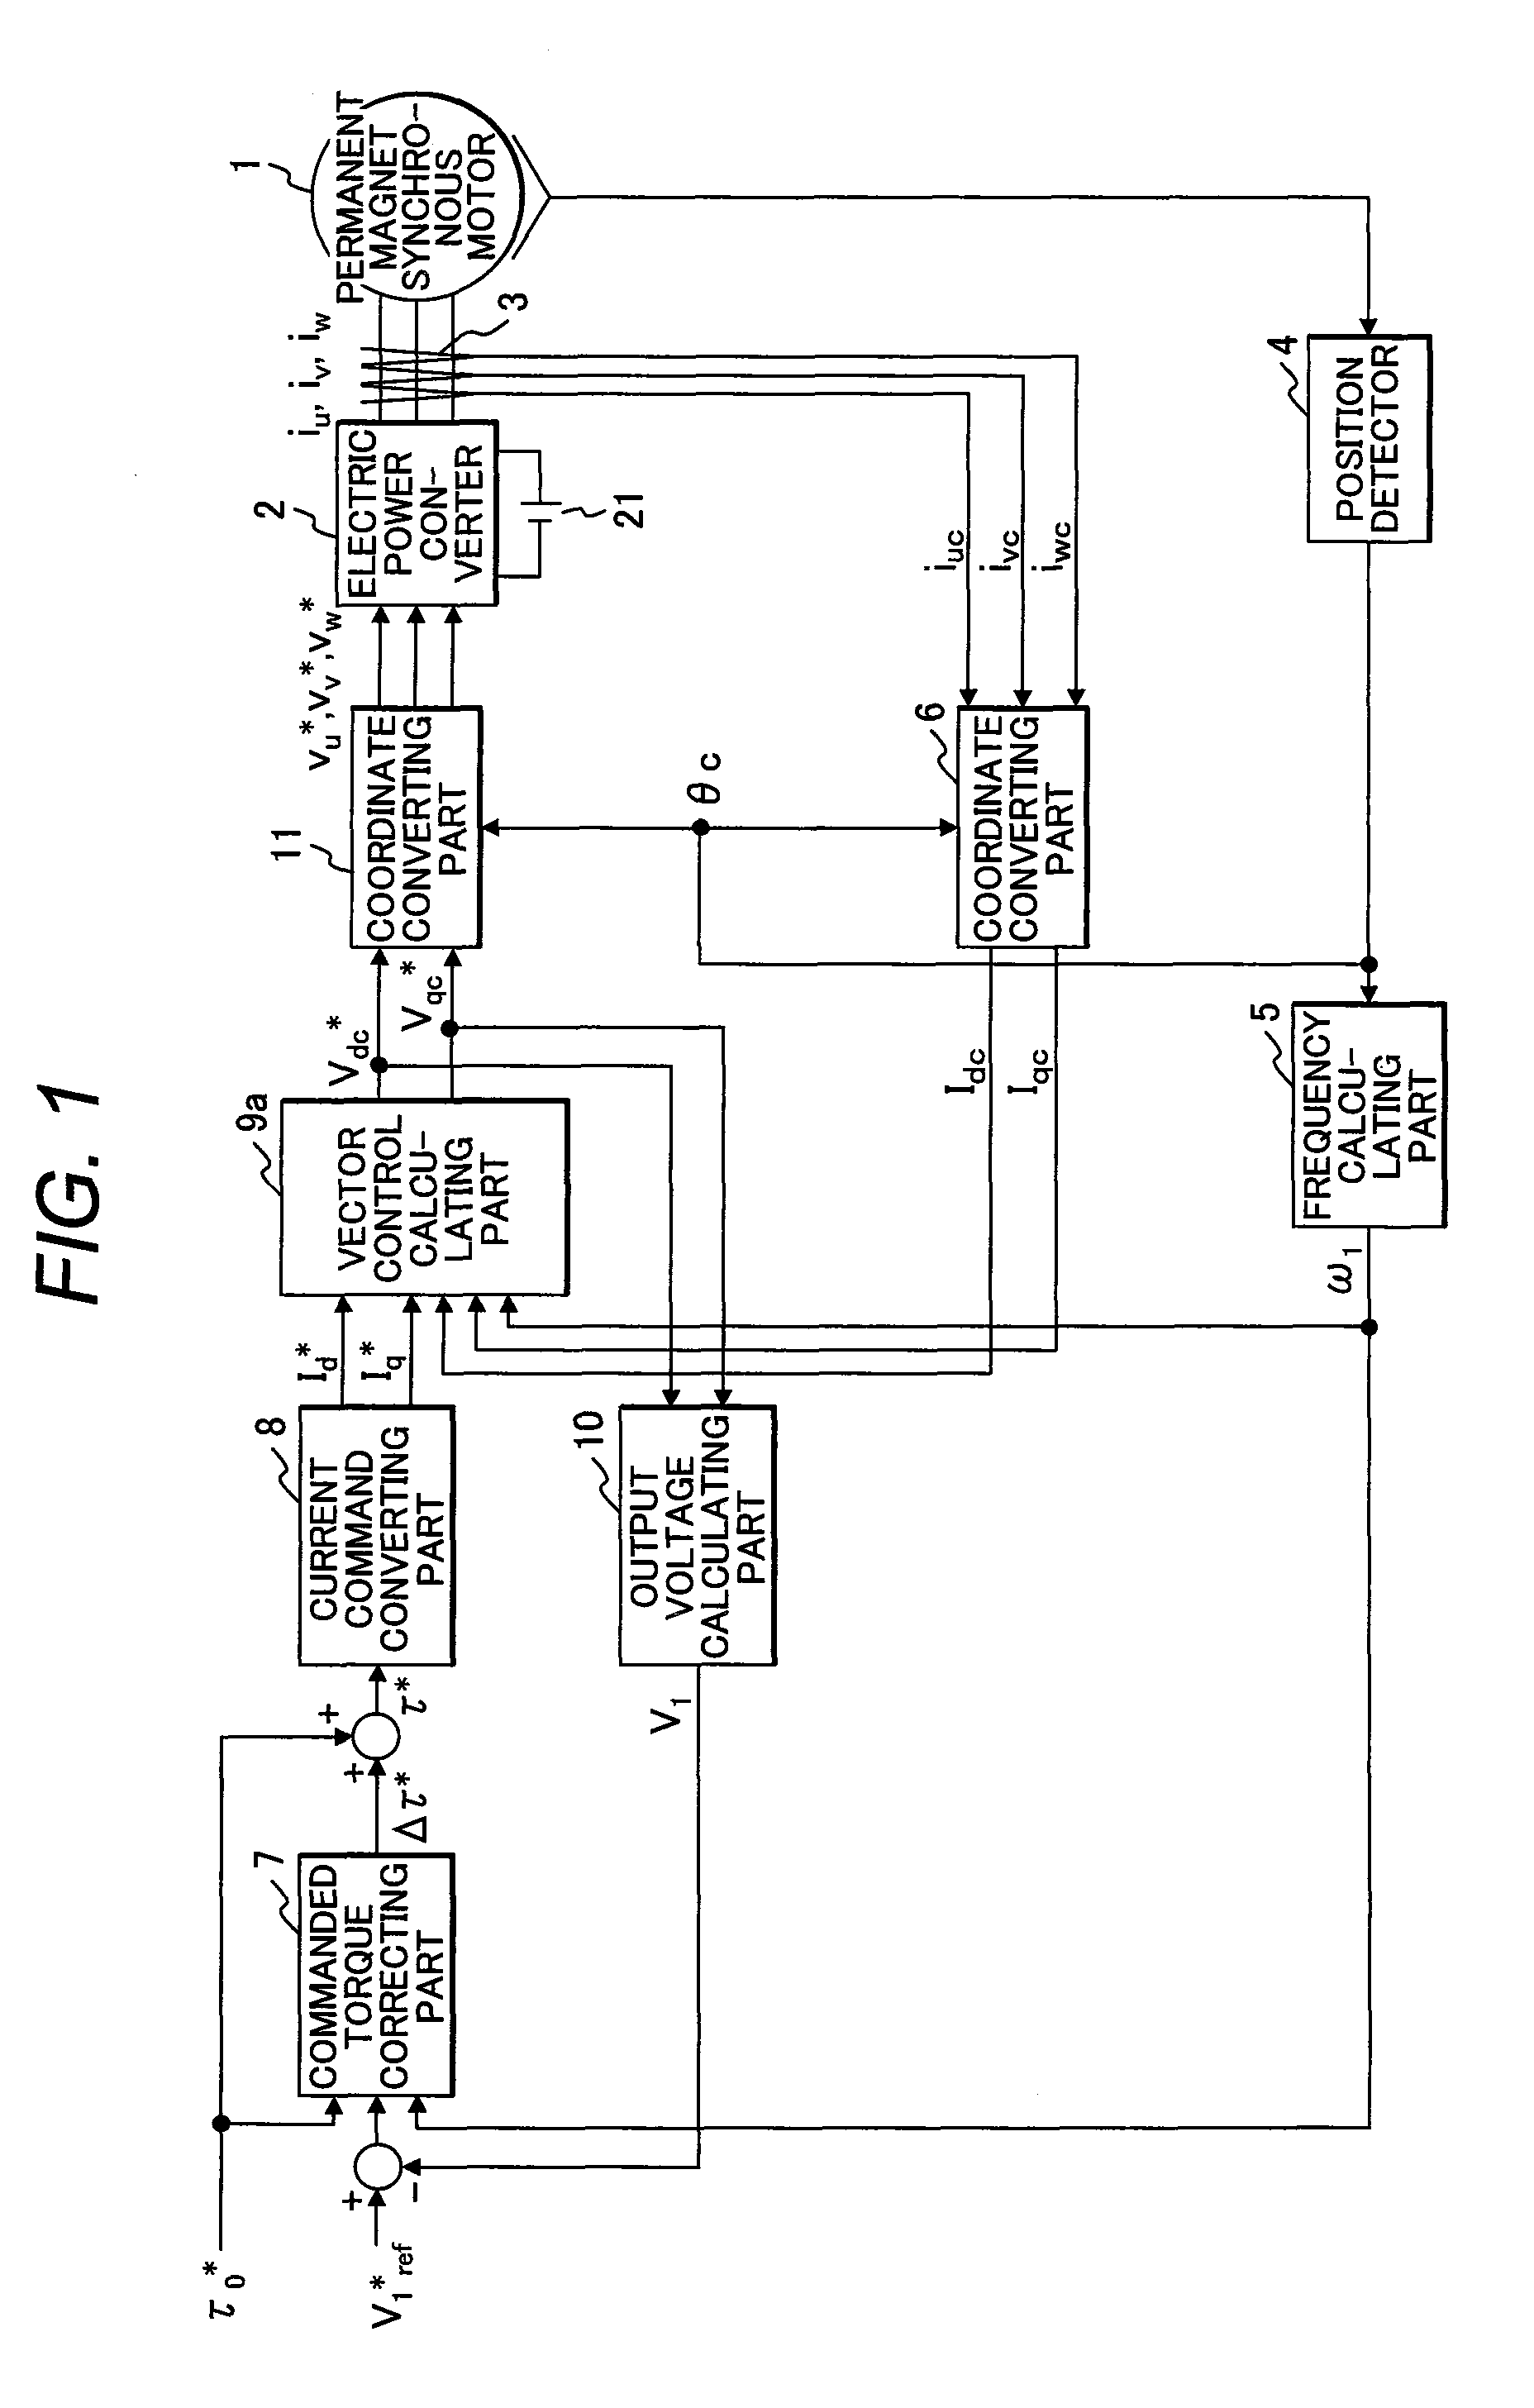 Torque controller for permanent magnet synchronous motor